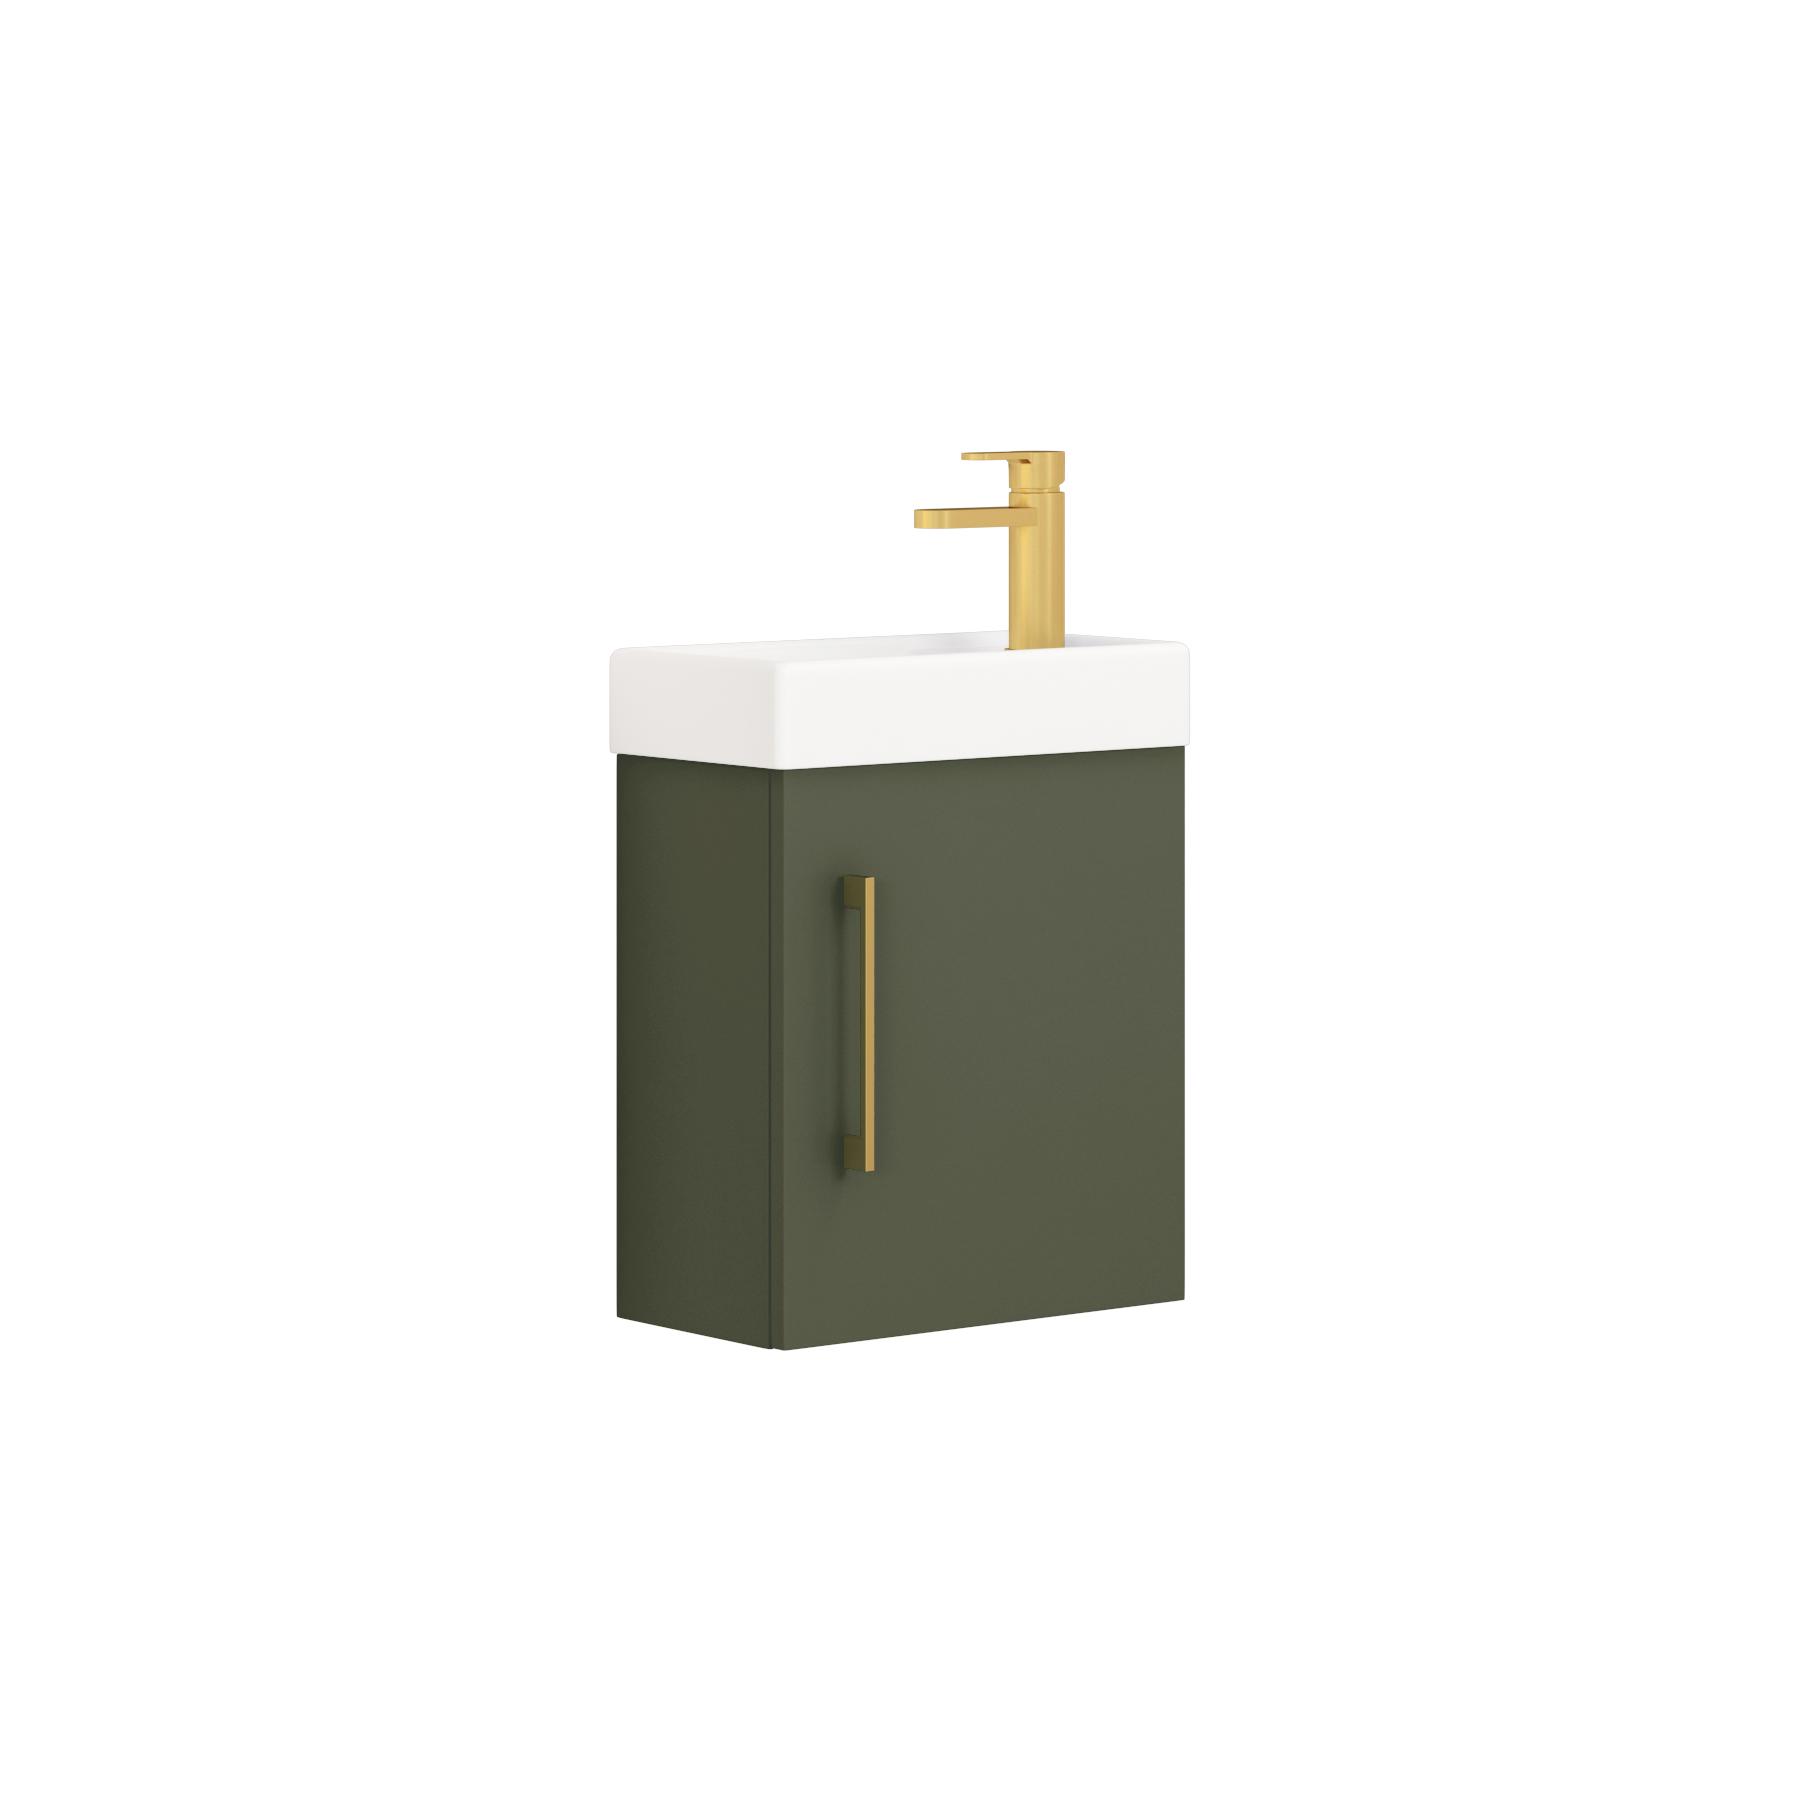 Modena 400mm Satin Green Cloakroom Compact Wall Hung Vanity Sink Unit with Brushed Brass Handle - 1 Door